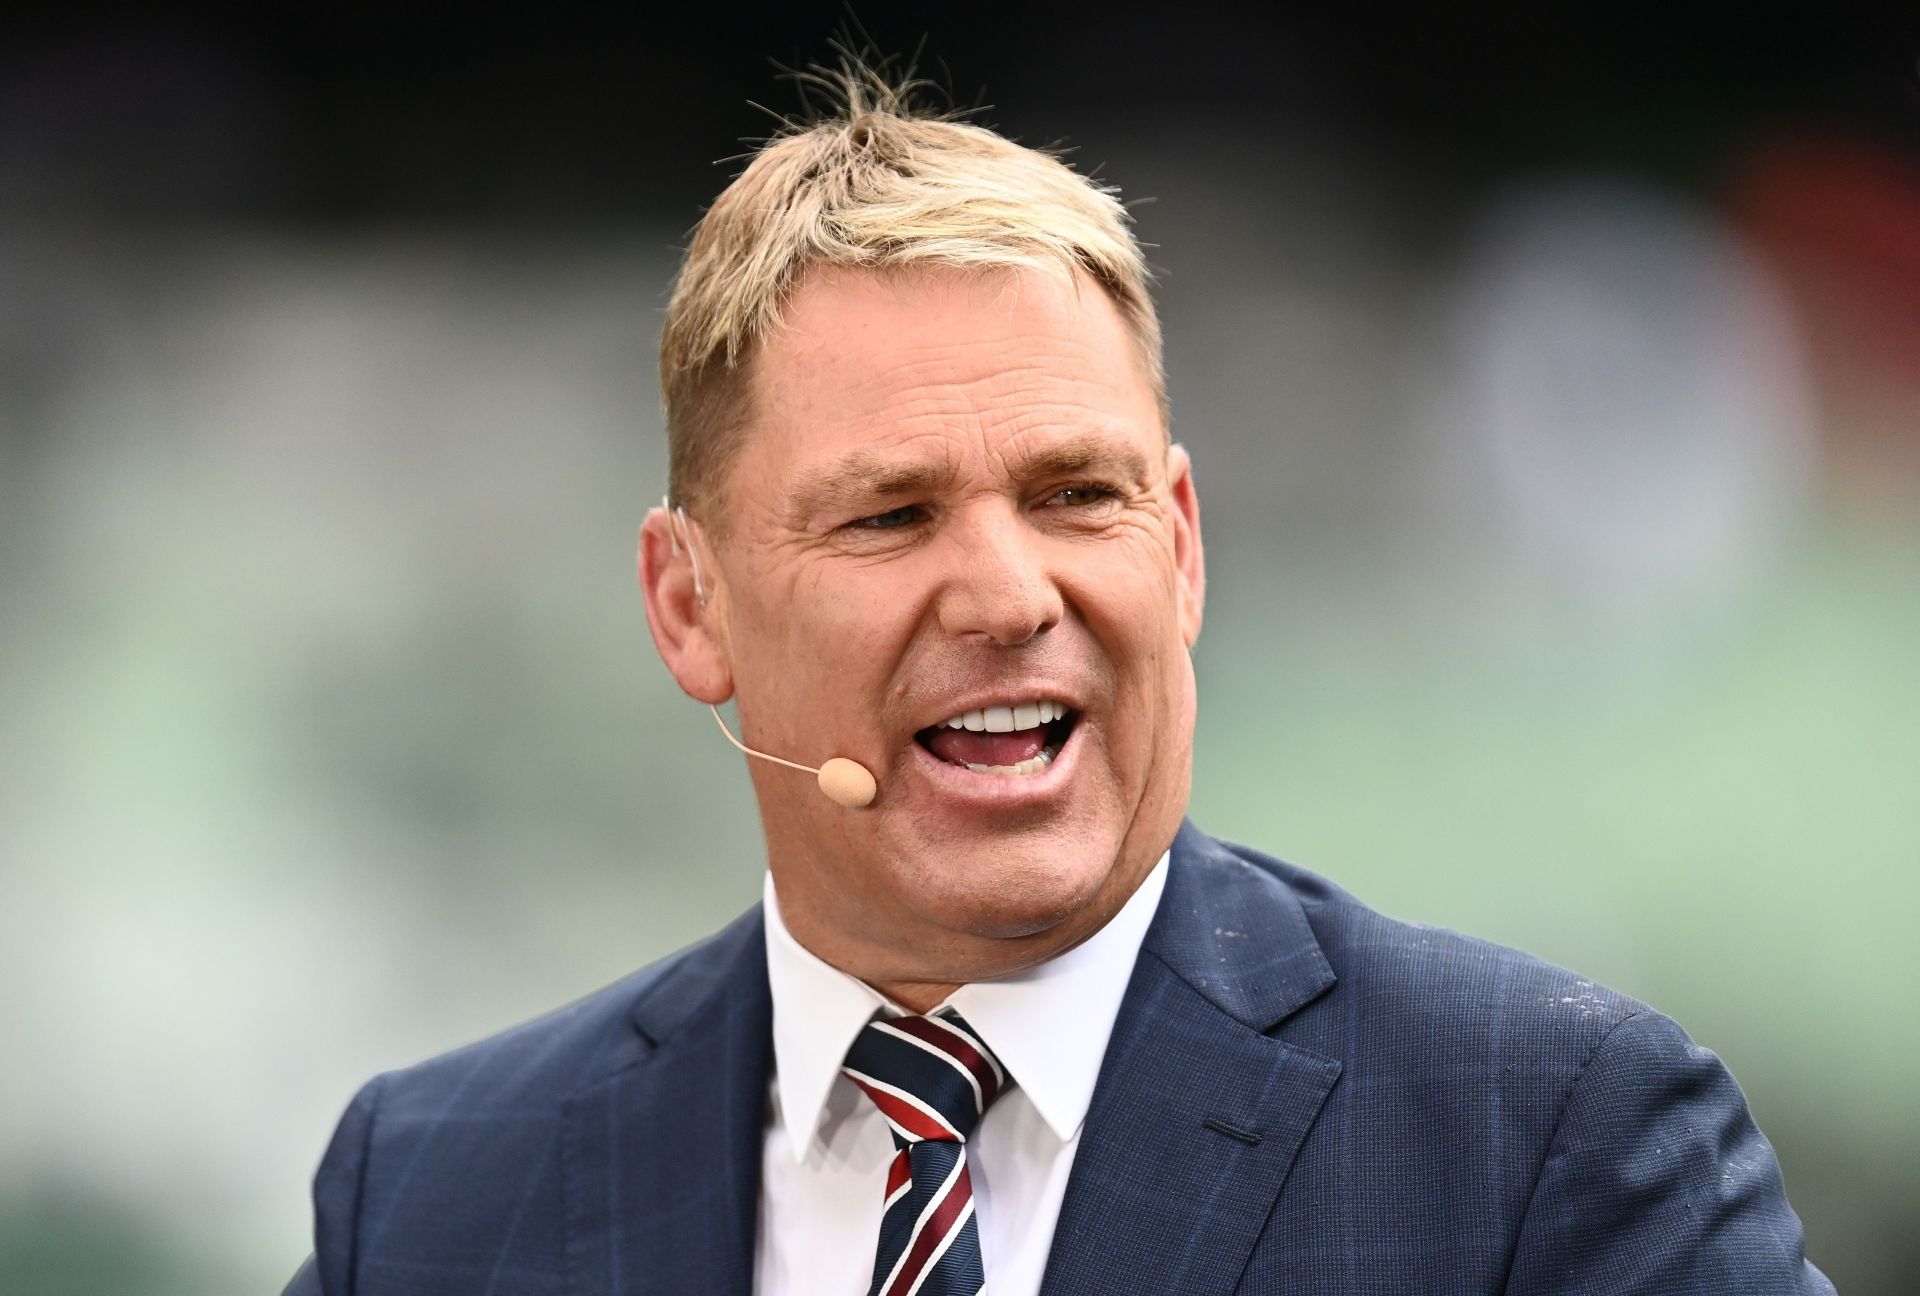 Shane Warne passed away at the age of 52.